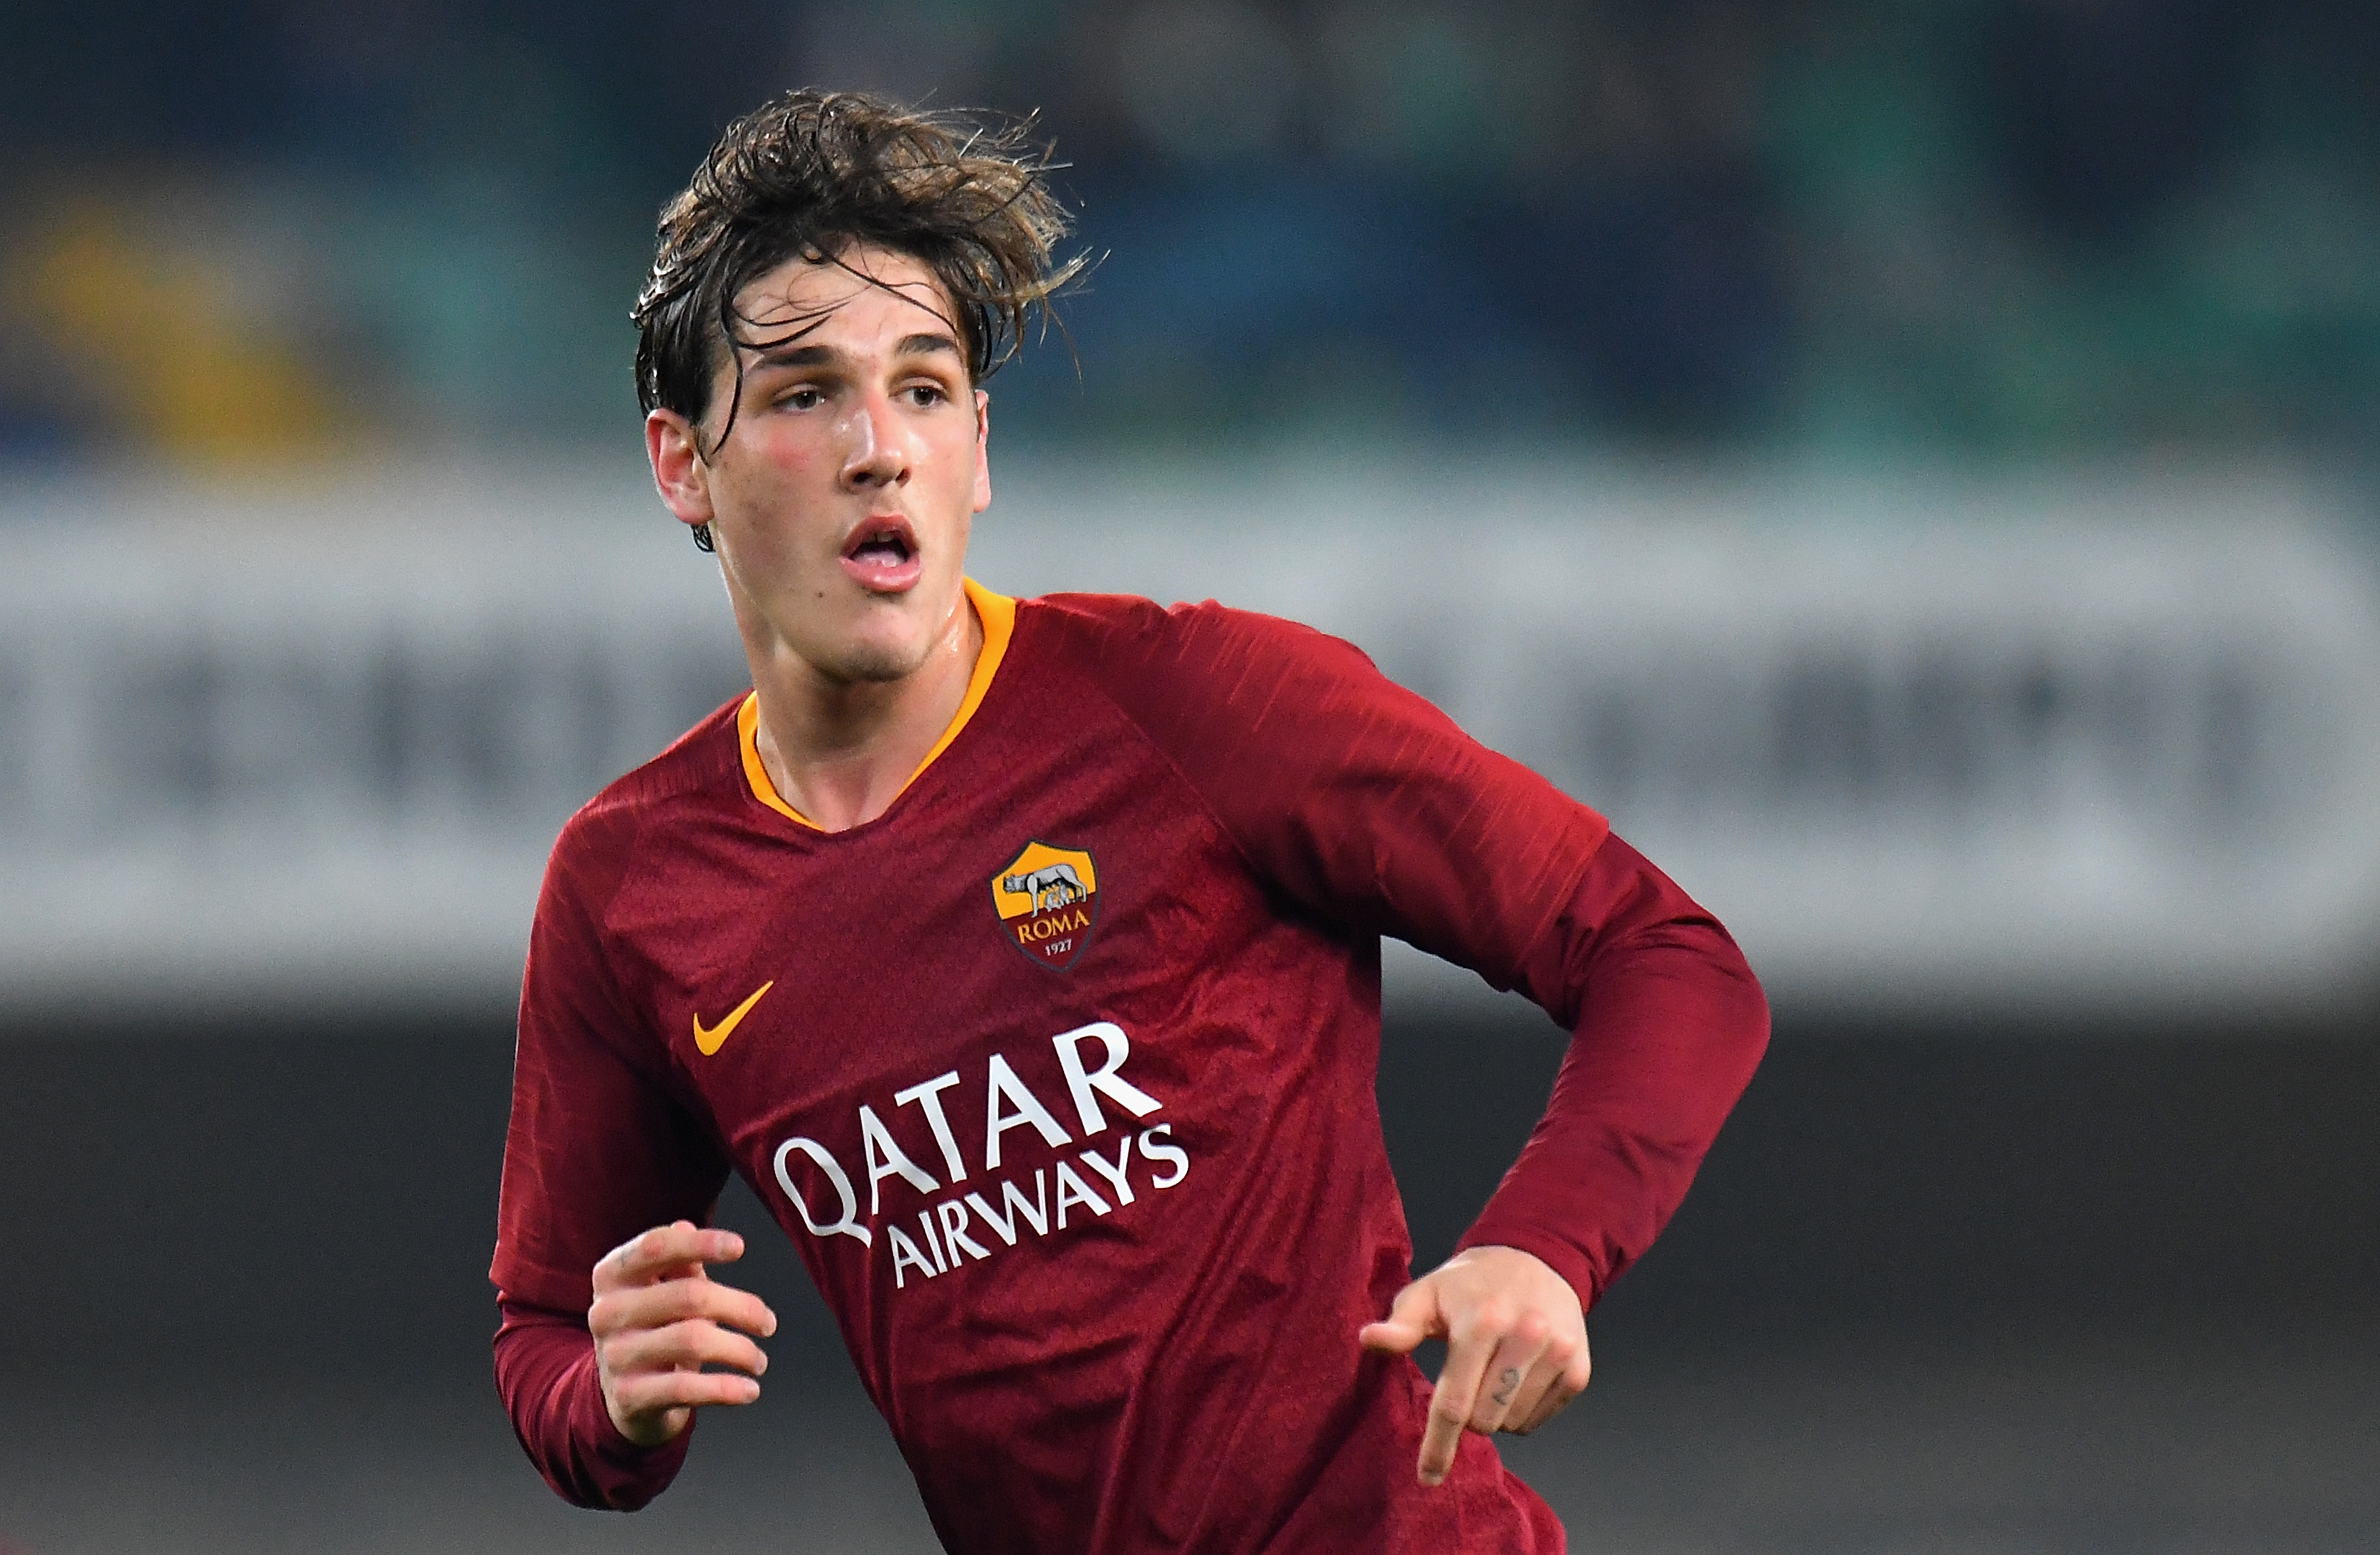 VERONA, ITALY - FEBRUARY 08:  Nicolò Zaniolo of AS Roma looks on during the Serie A match between Chievo Verona and AS Roma at Stadio Marc'Antonio Bentegodi on February 8, 2019 in Verona, Italy.  (Photo by Alessandro Sabattini/Getty Images)